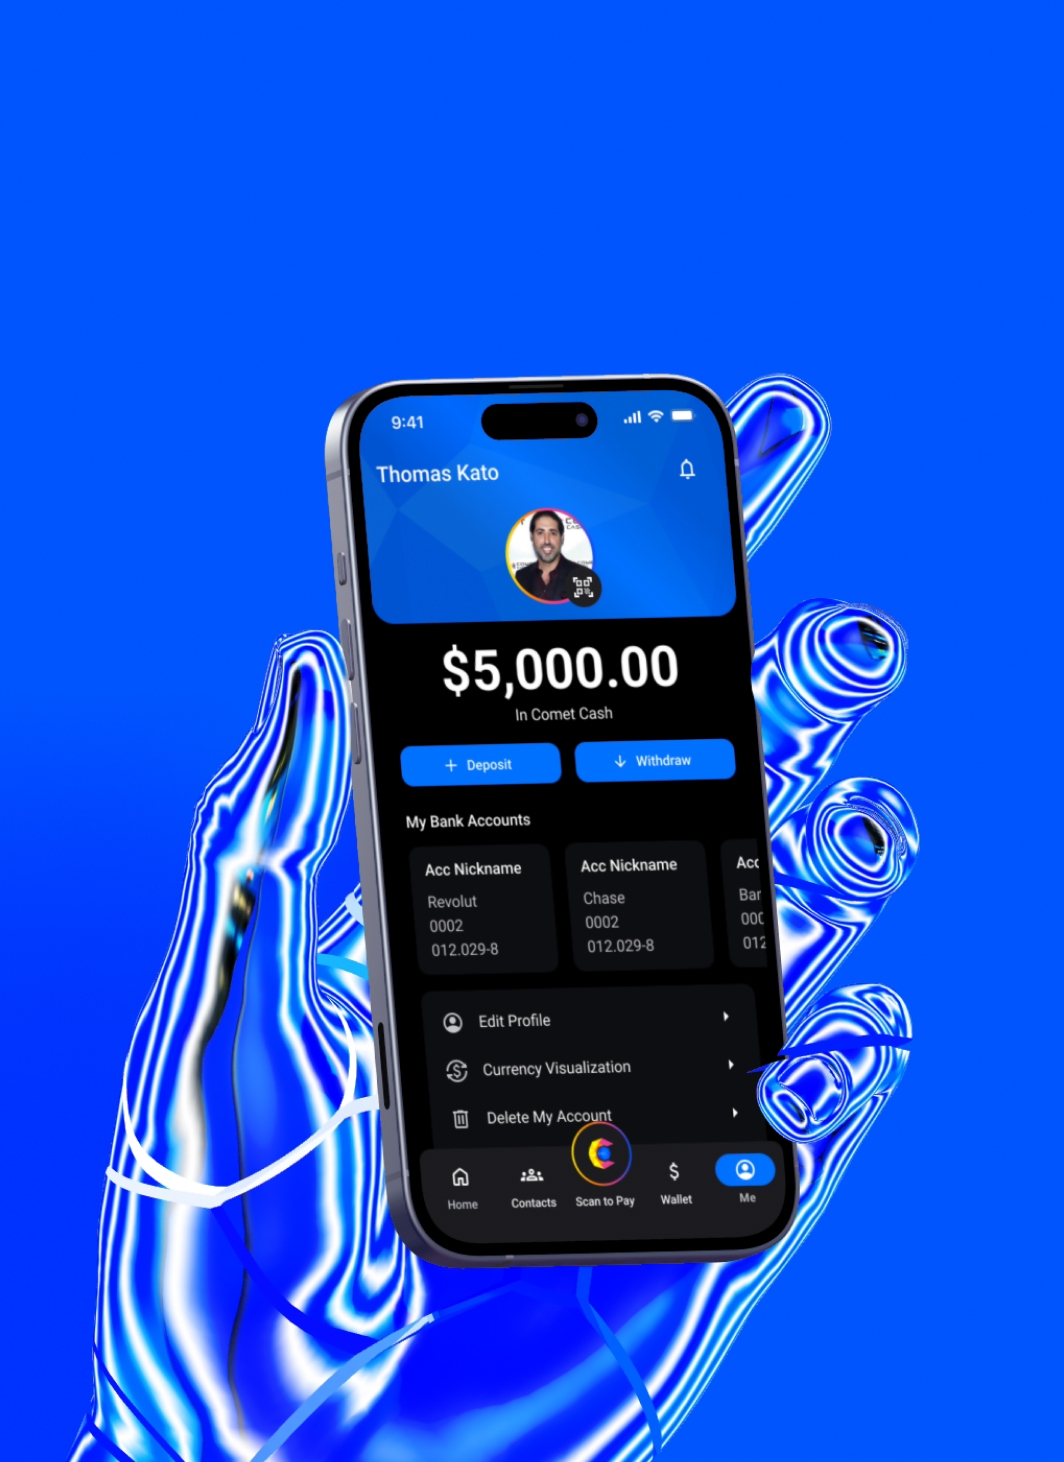 transparent hand is holding the phone with comet cash app